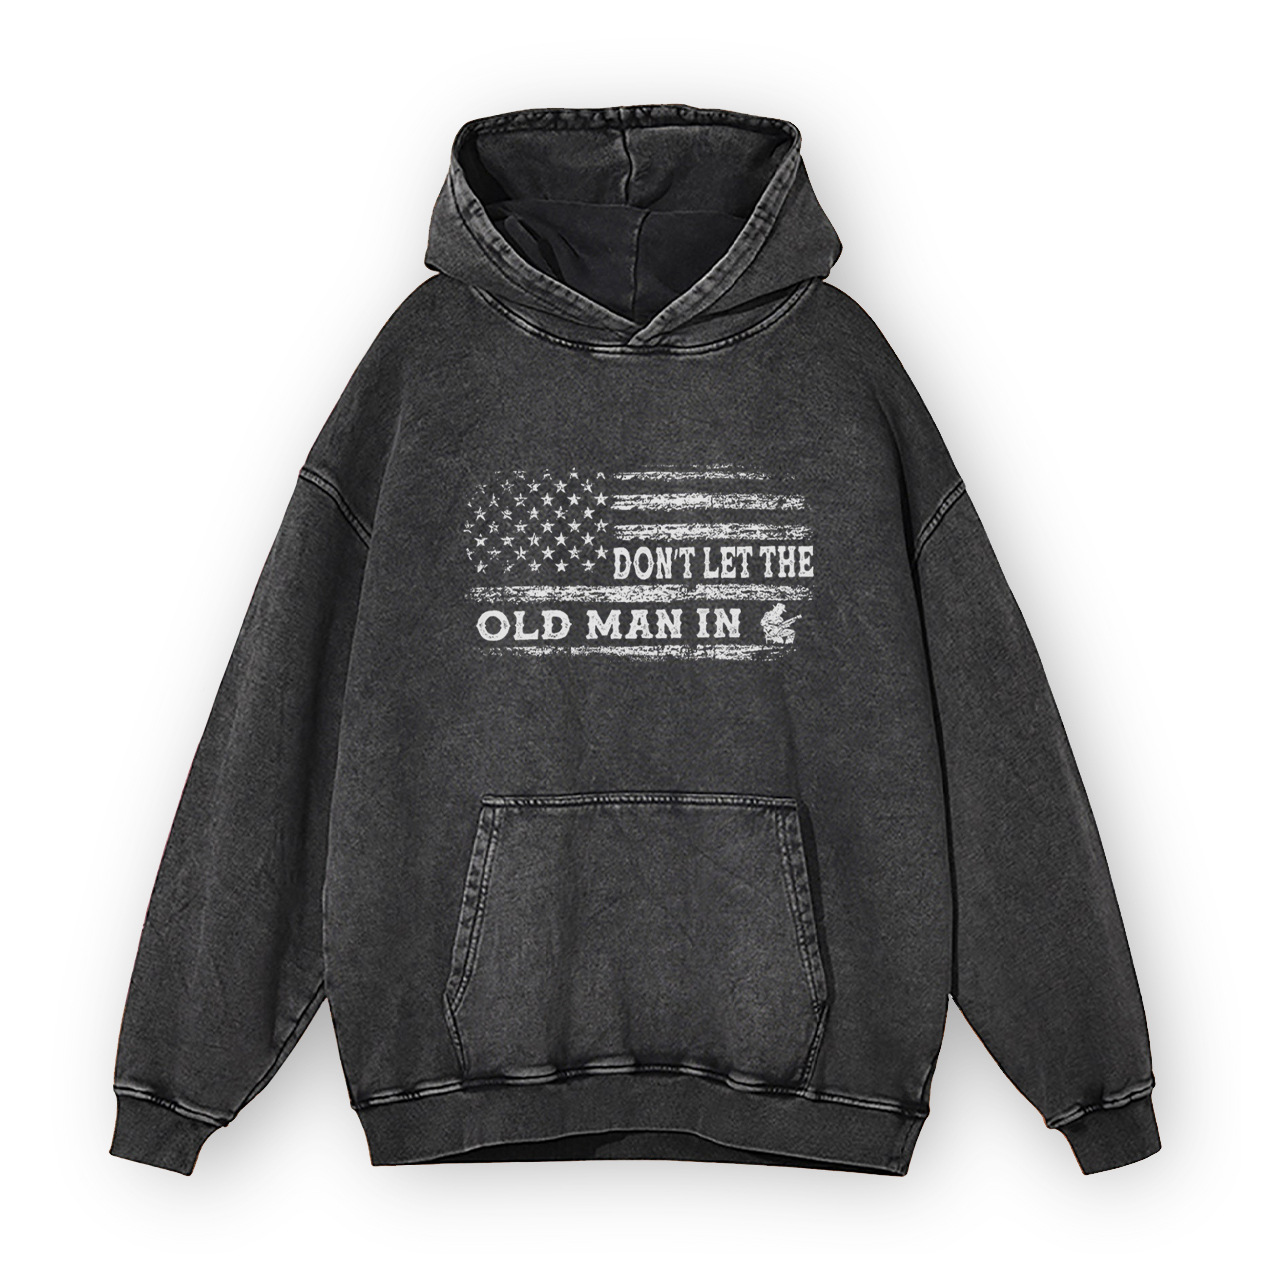 Country Music Don't Let the Old Man In Garment-Dye Hoodies